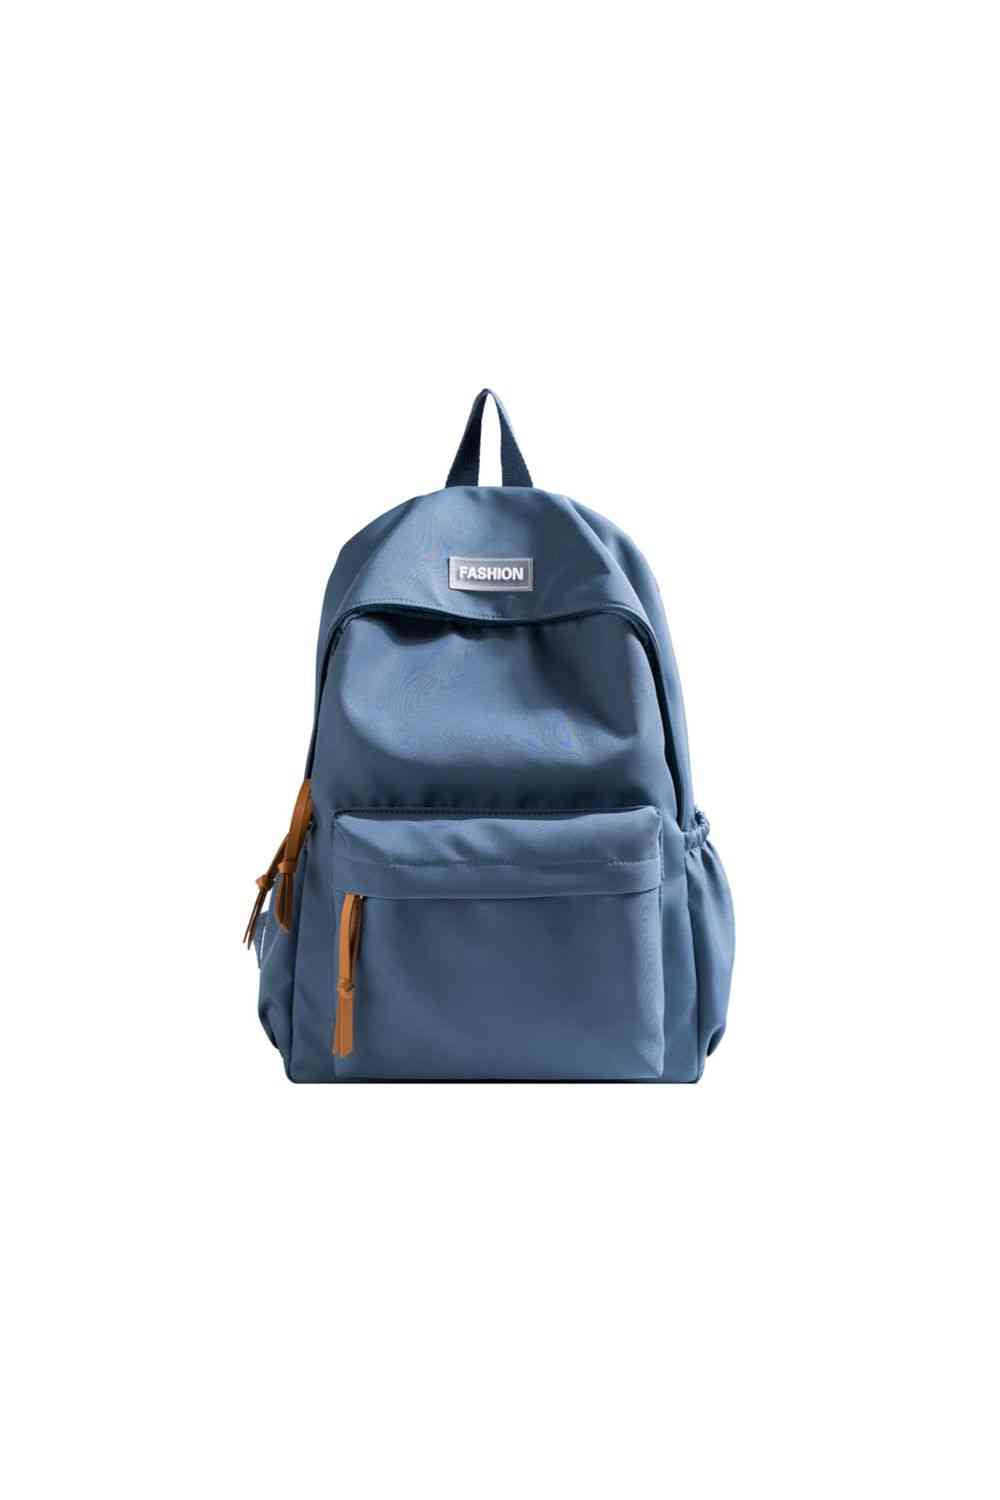 Adored FASHION Polyester Backpack Dusty Blue One Size